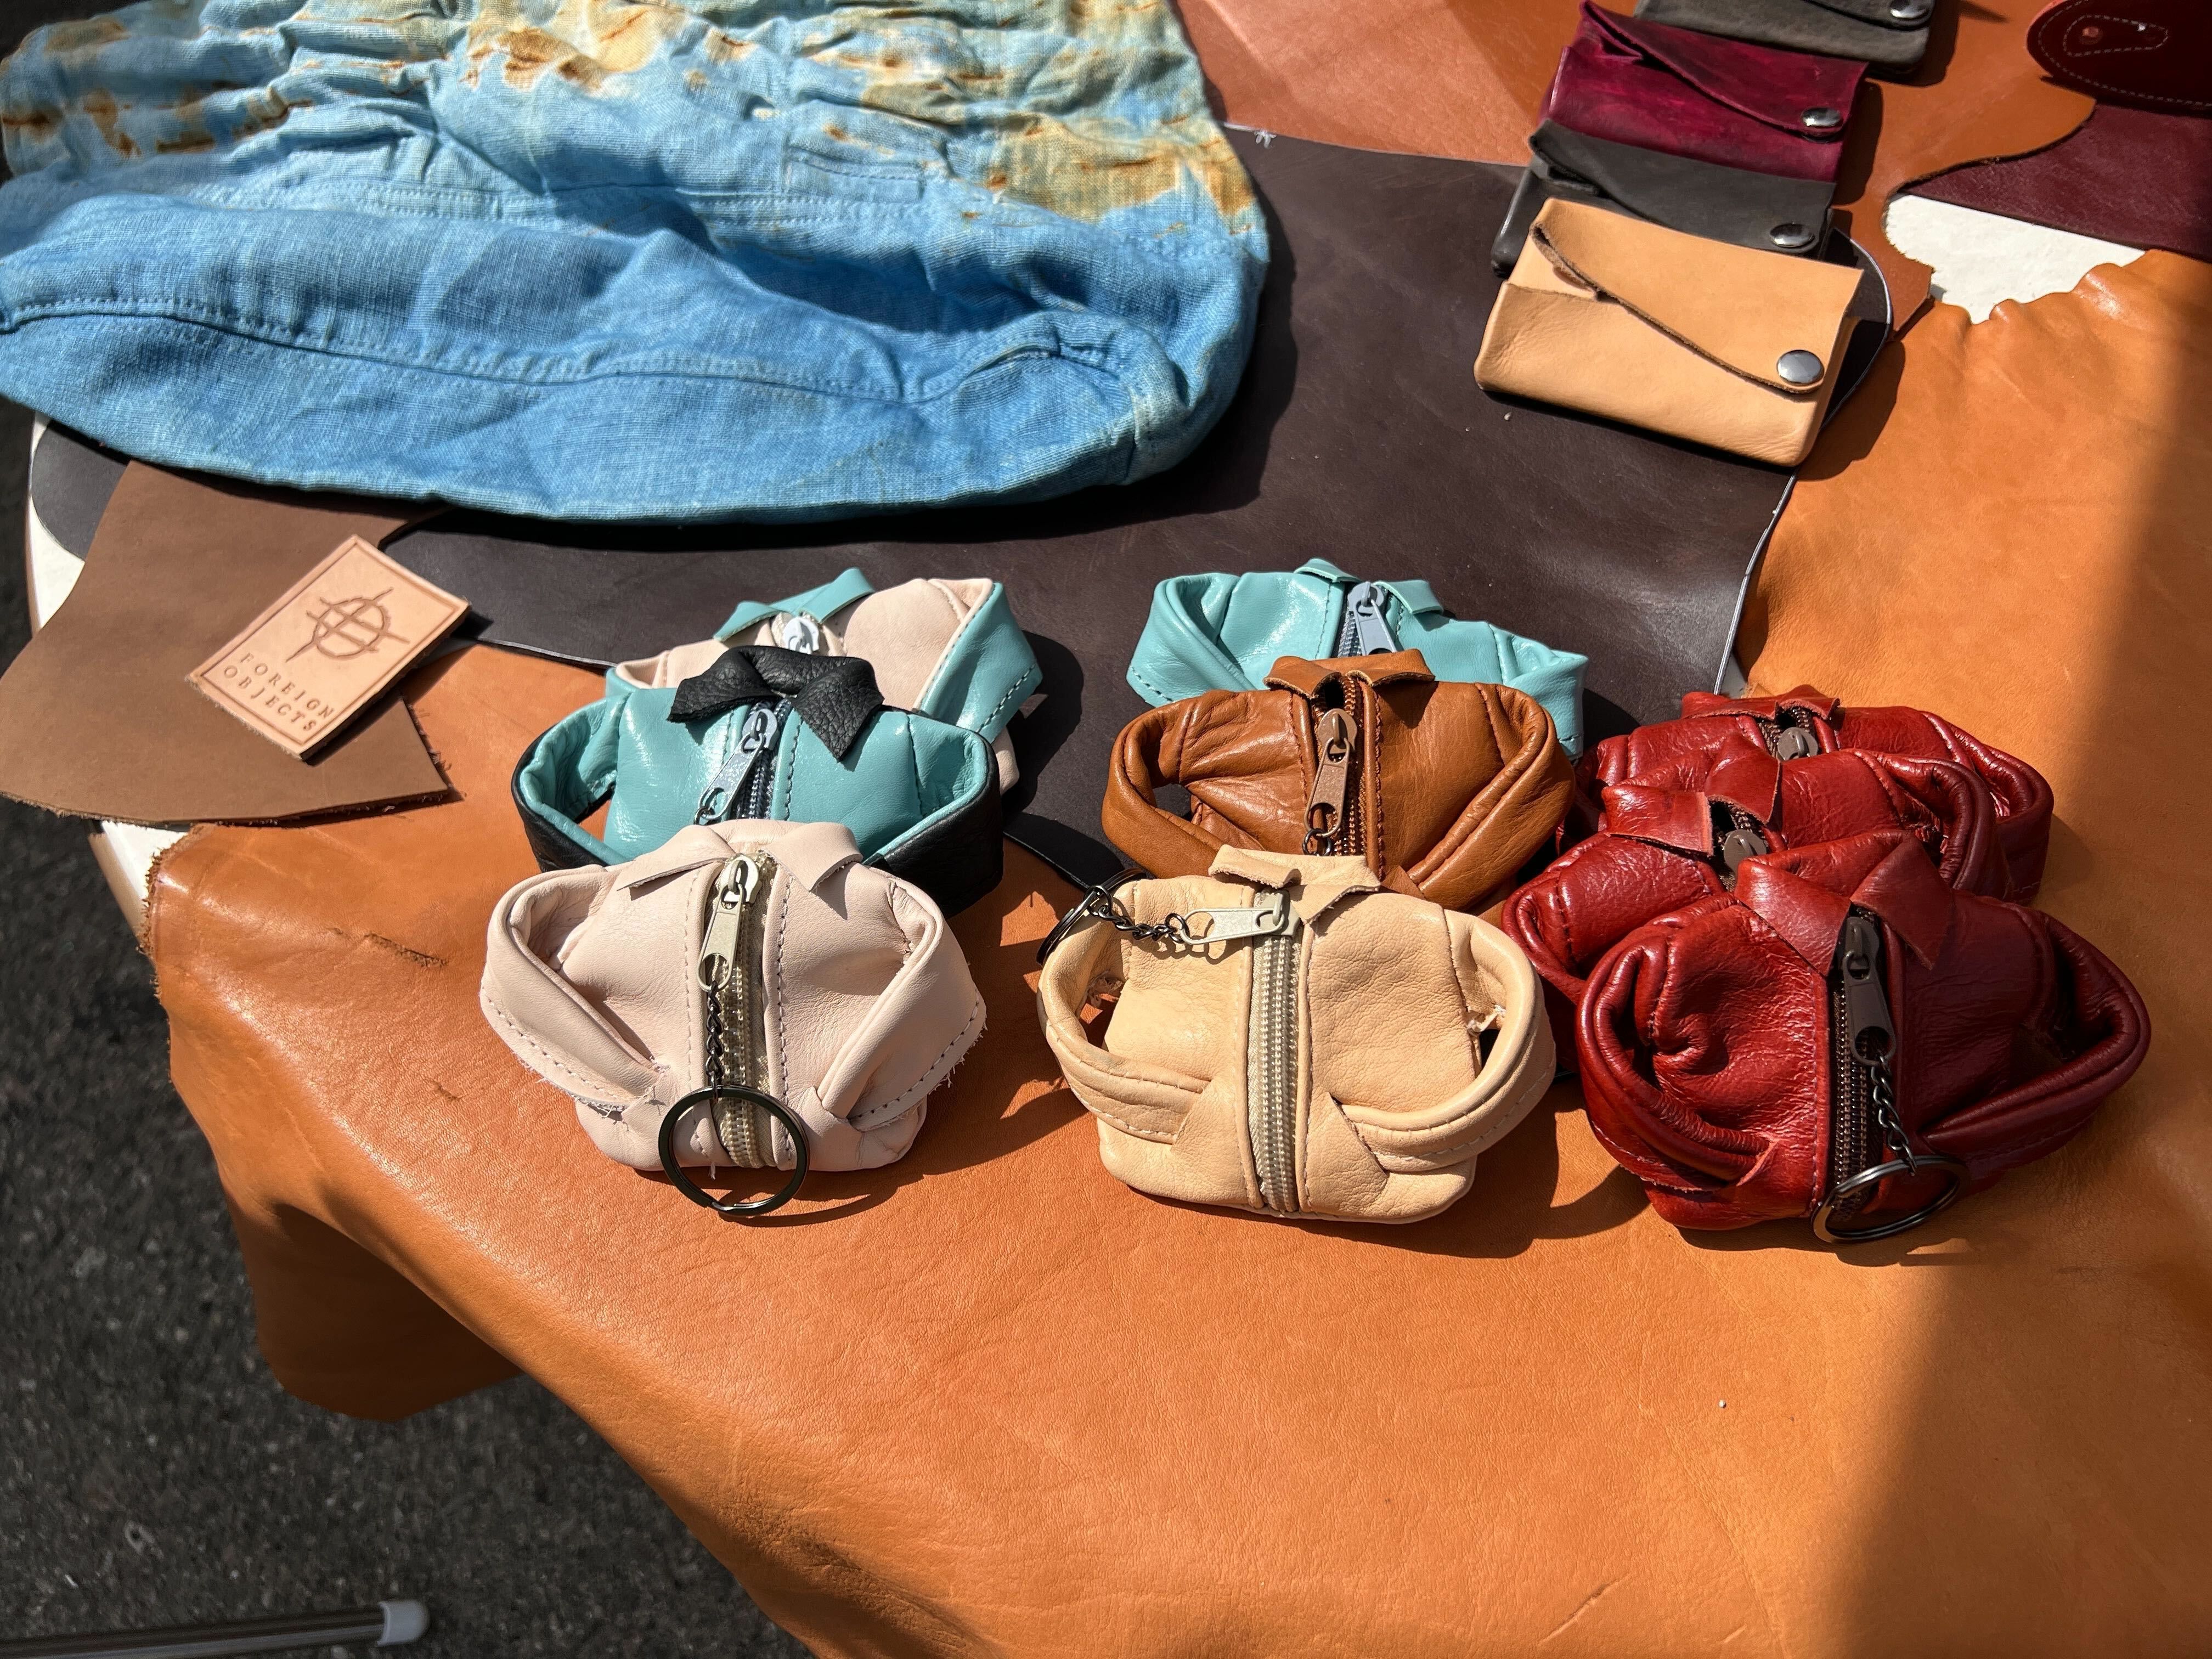 Tiny jacket coin purses made by Foreign Objects that are cut and sewn by hand in Detroit.